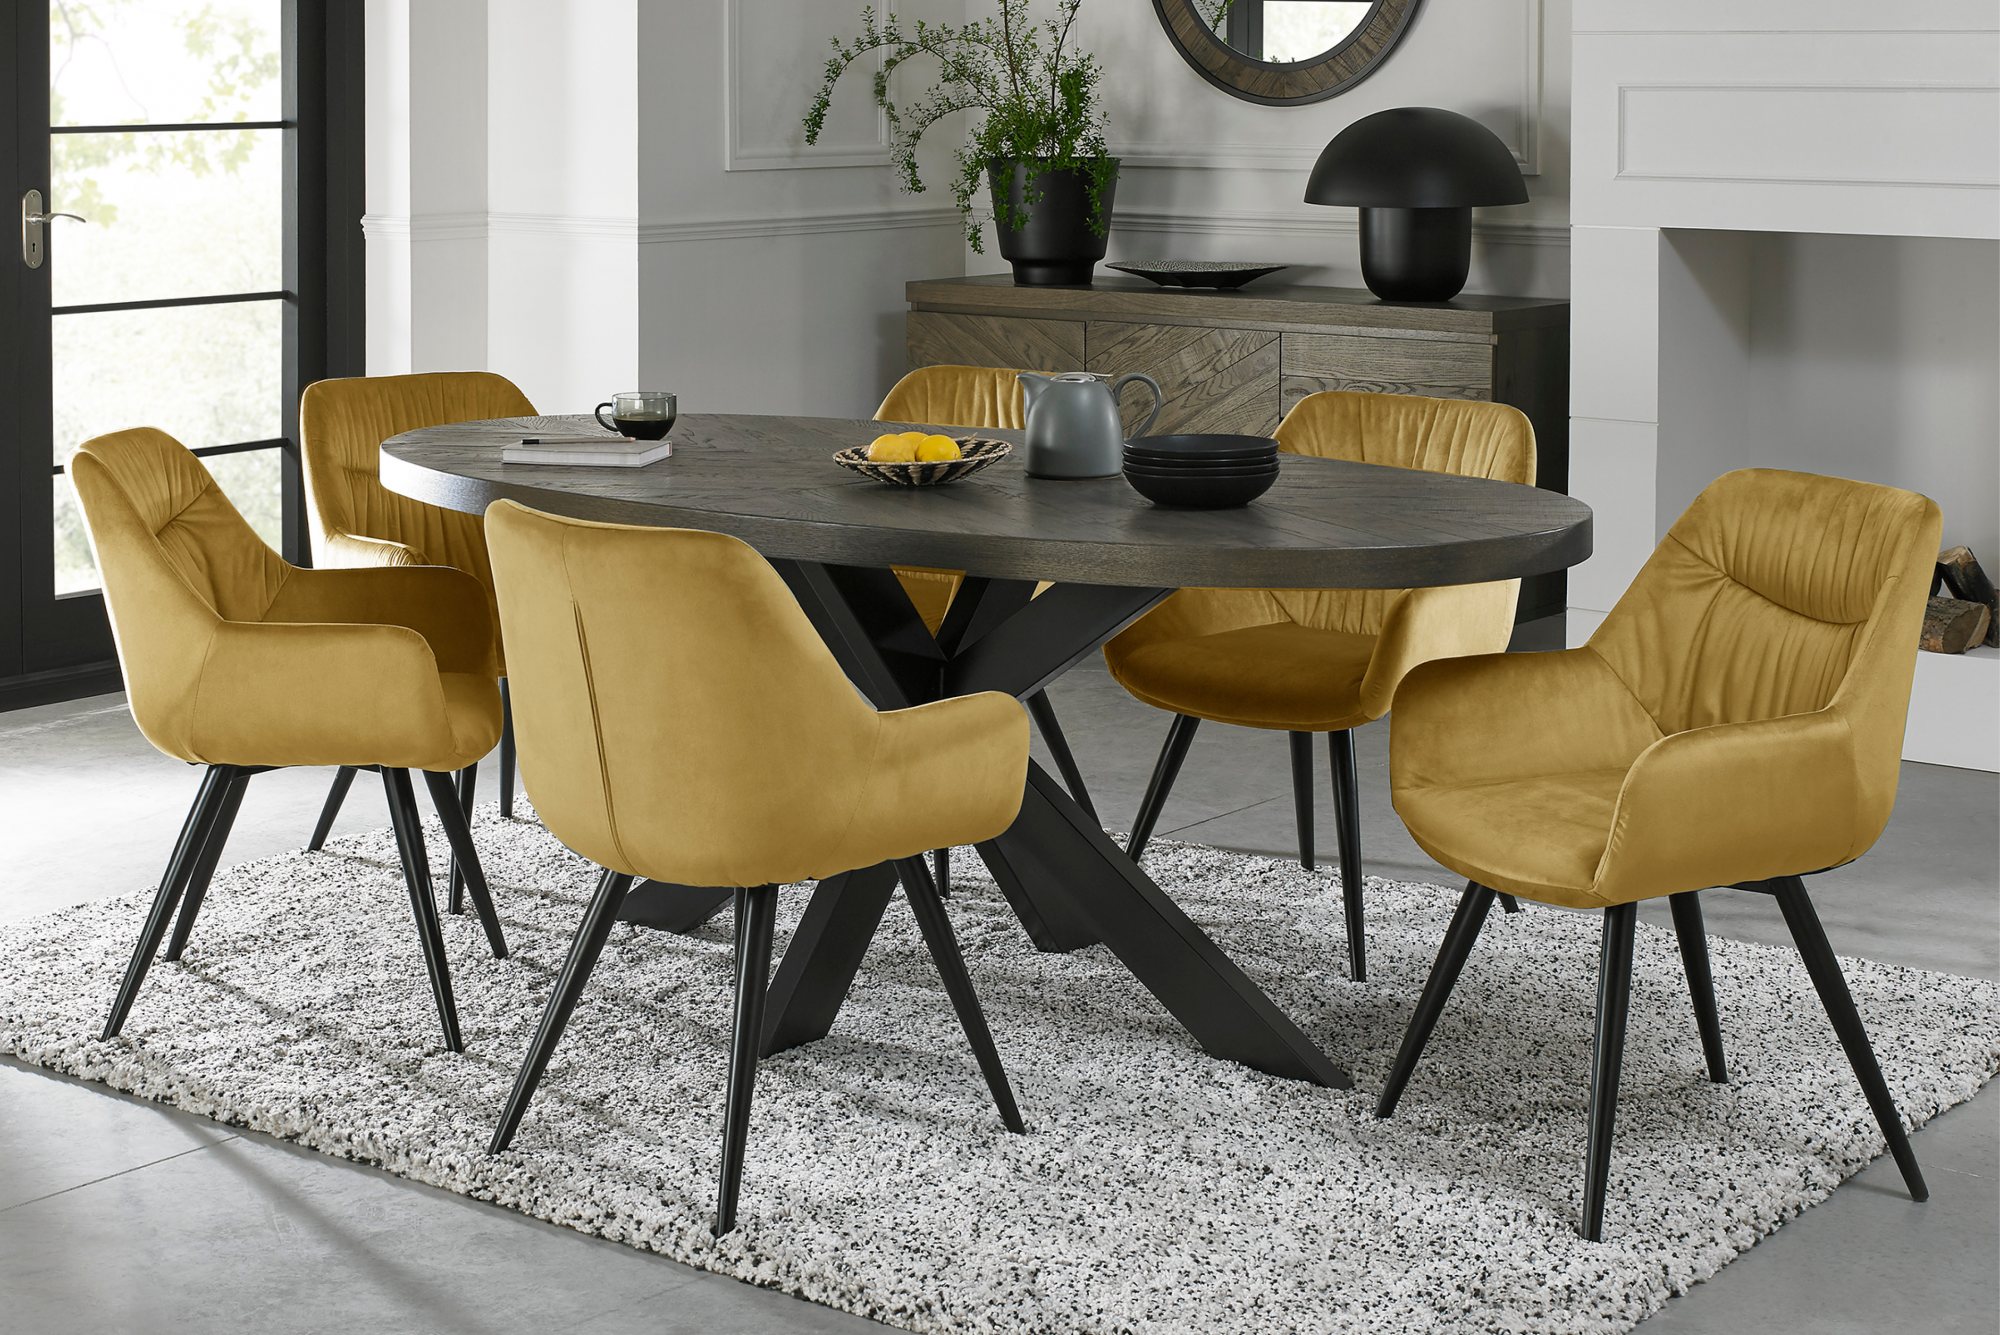 Home Origins Bosco fumed oak 6 seater dining table with 6 Dali chairs- mustard velvet fabric